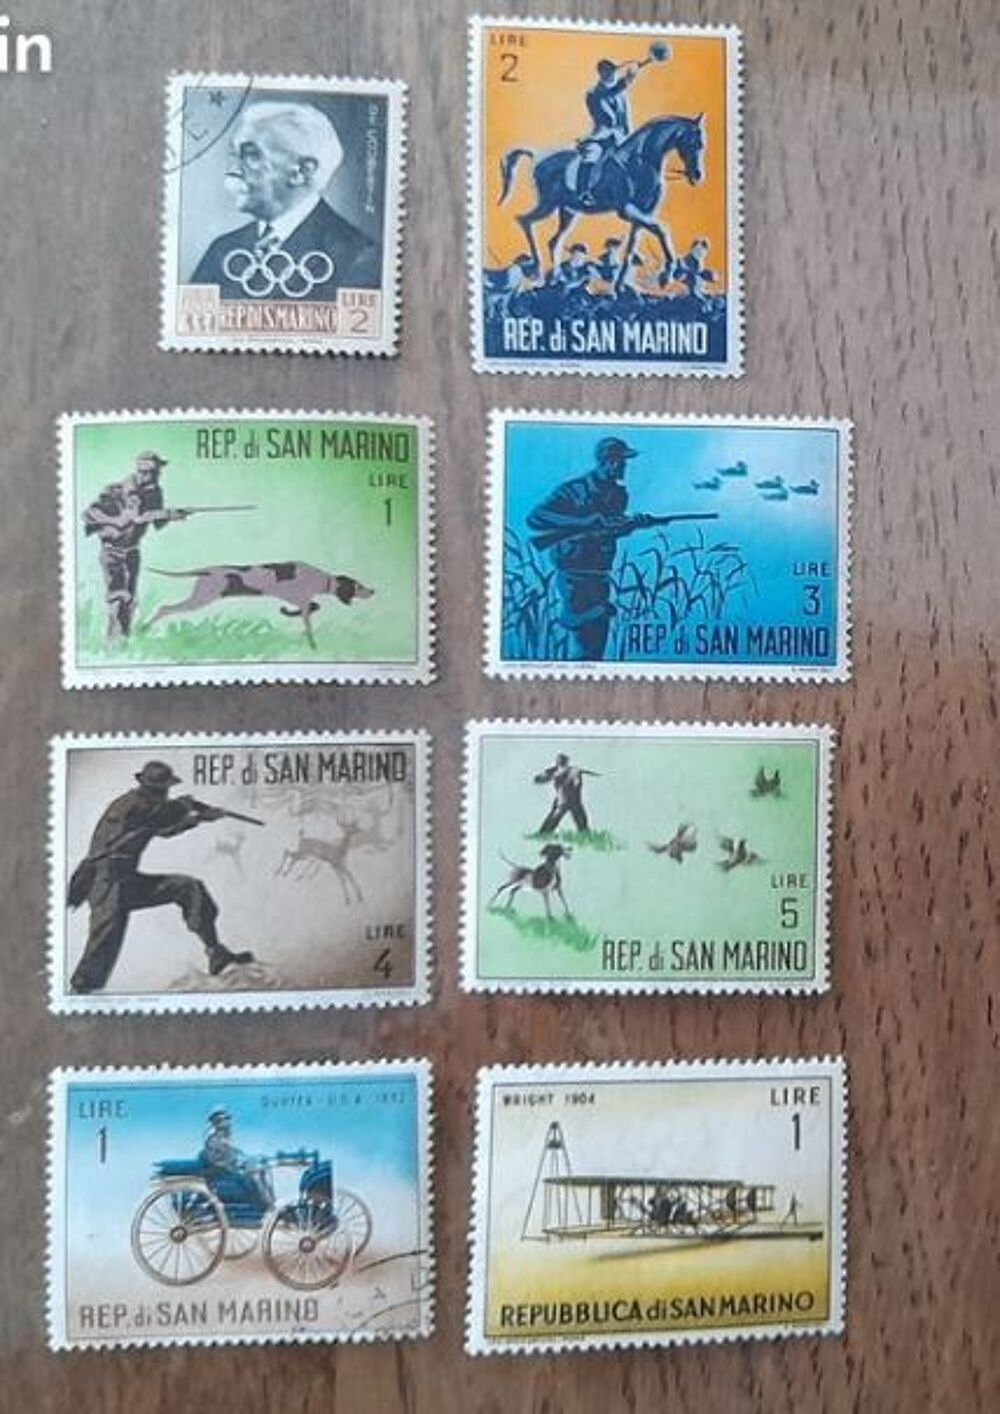 TIMBRES d' EUROPE 32 PAYS (sauf France) 